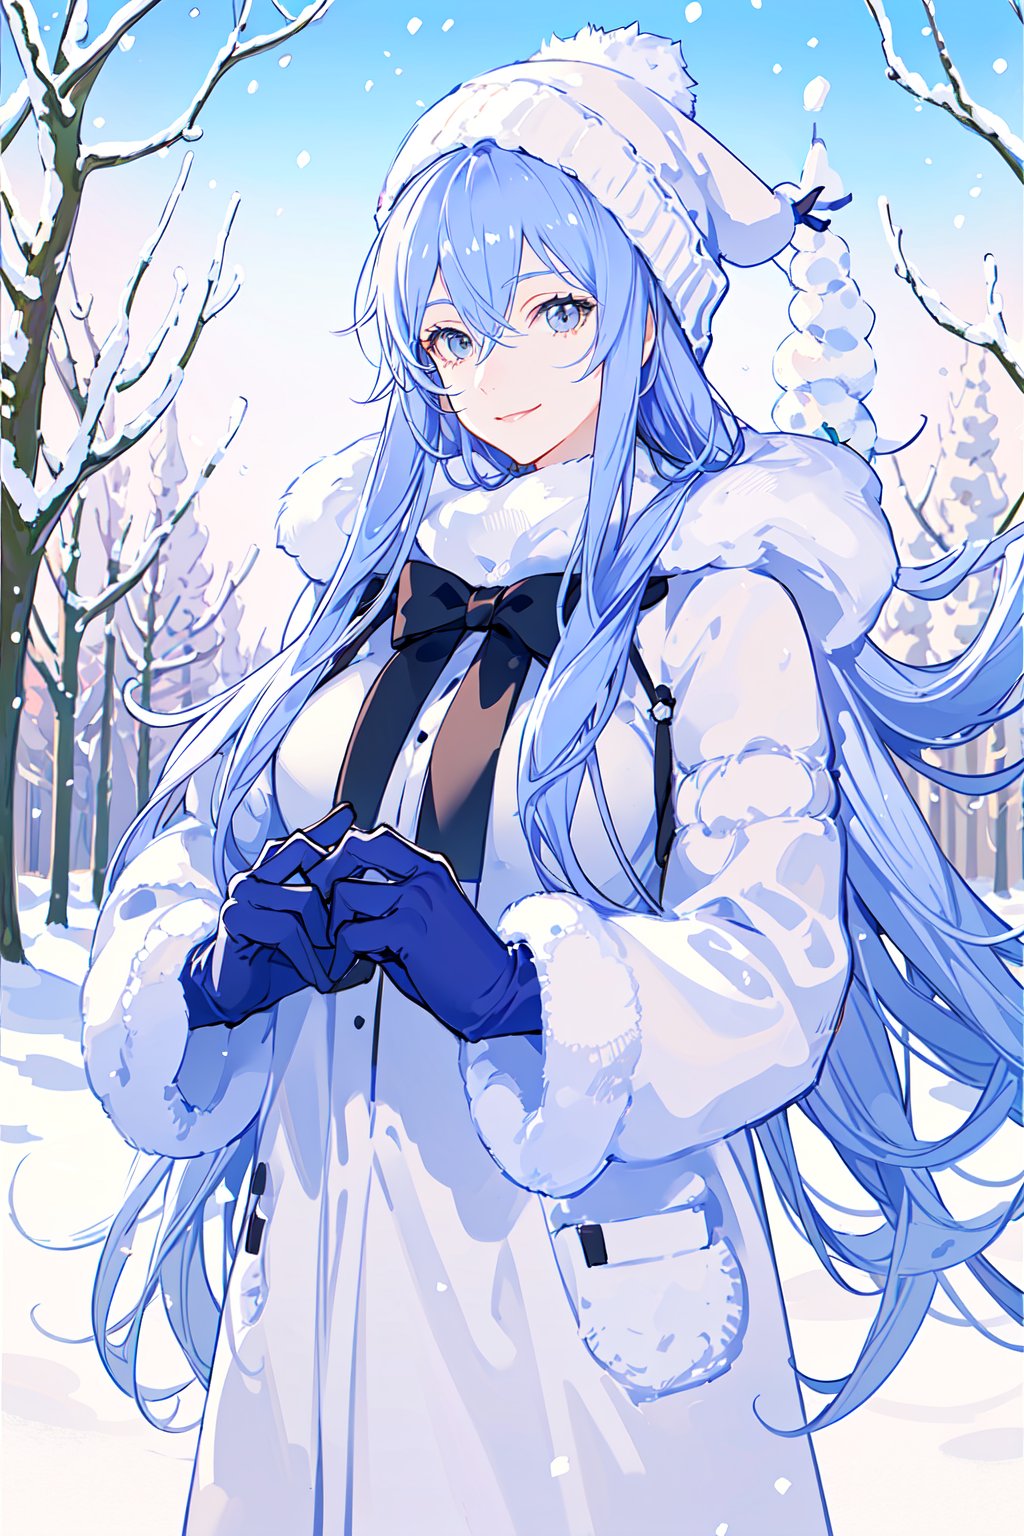 smile,beautiful woman,heavy winter coat,a woolly hat,gloves,holding a snow-white husky,whose fur gleams pristine in the winter sunlight,The woman's demeanor exudes gentleness and affection,a serene winter street,trees lining the sides covered in white snow,warmth and happiness,photo r3alm,Extremely Realistic